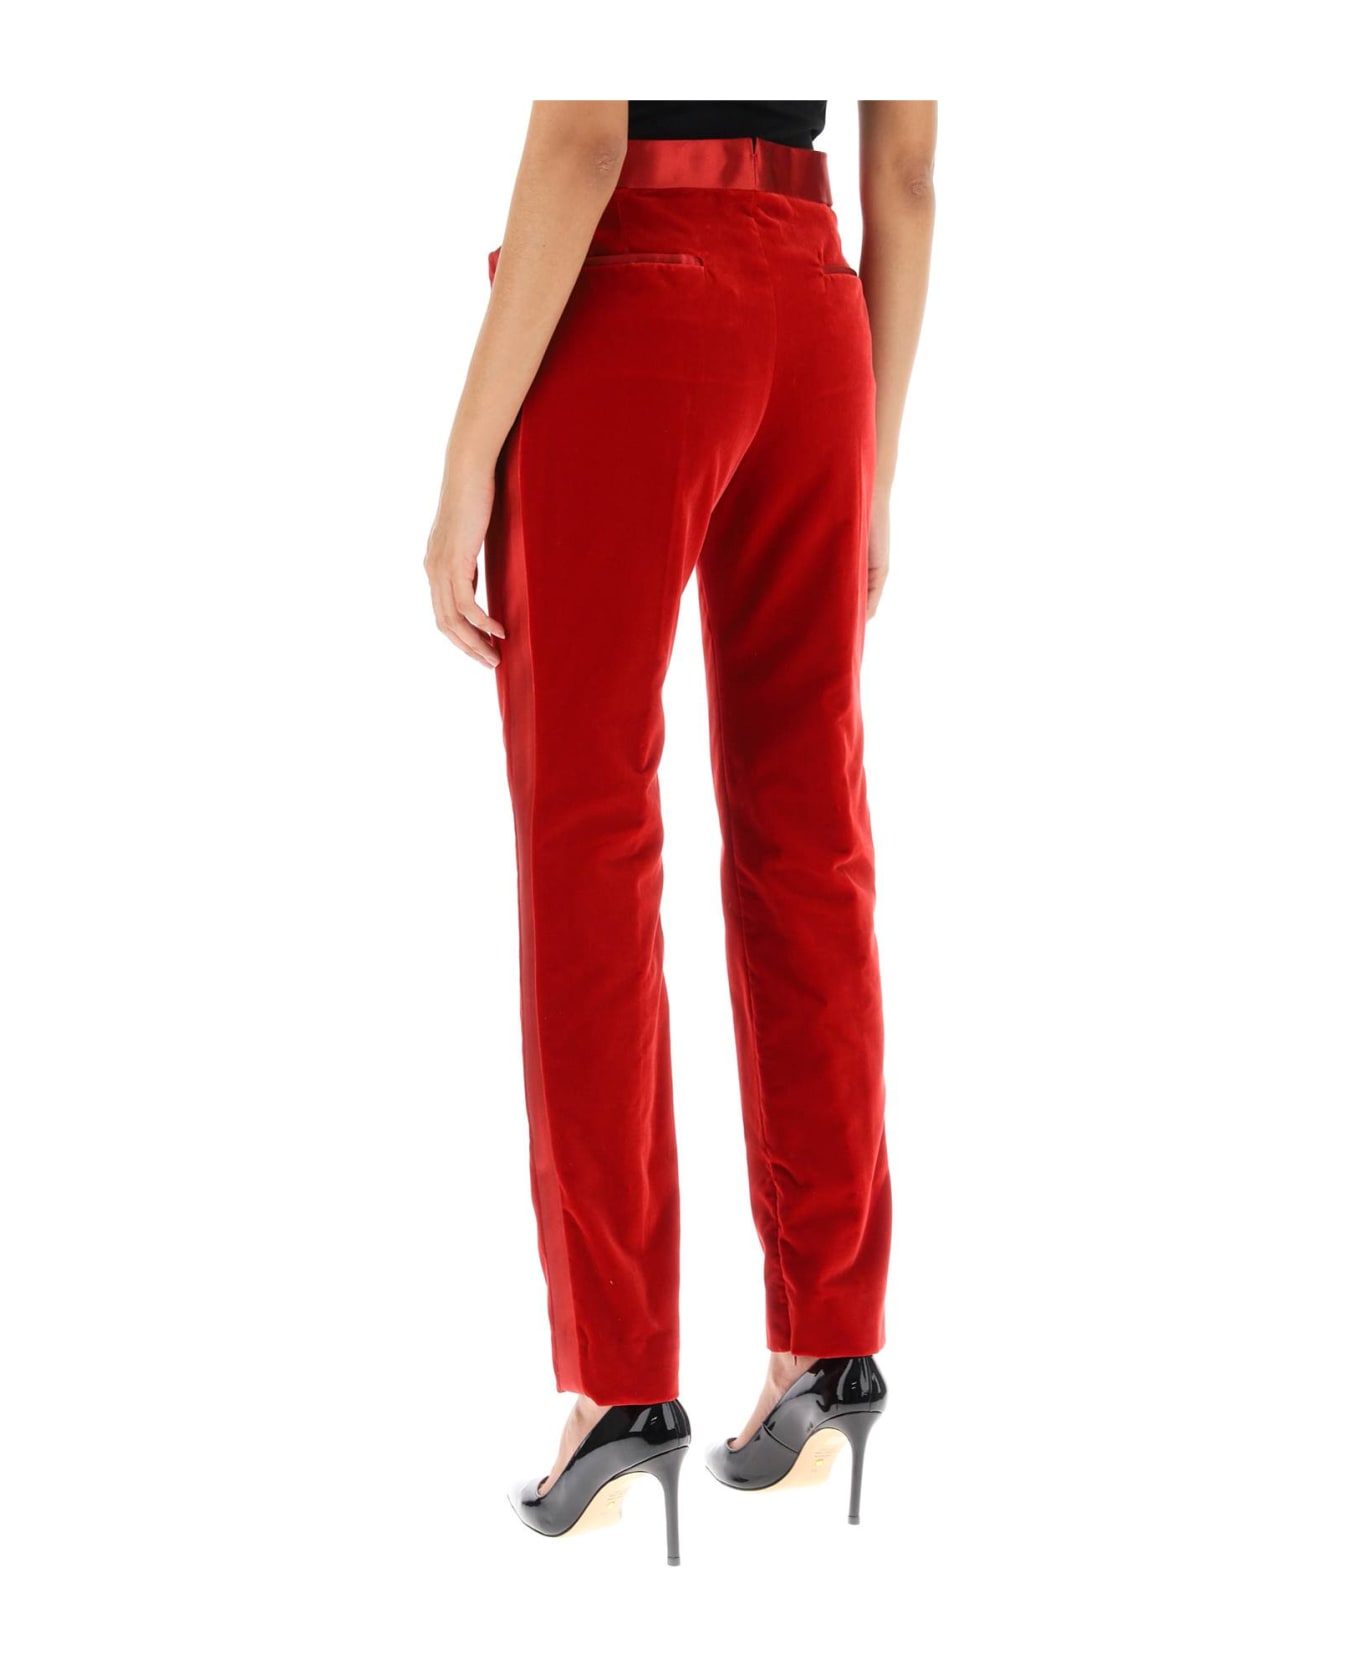 Tom Ford Velvet Pants With Satin Bands - RED (Red)